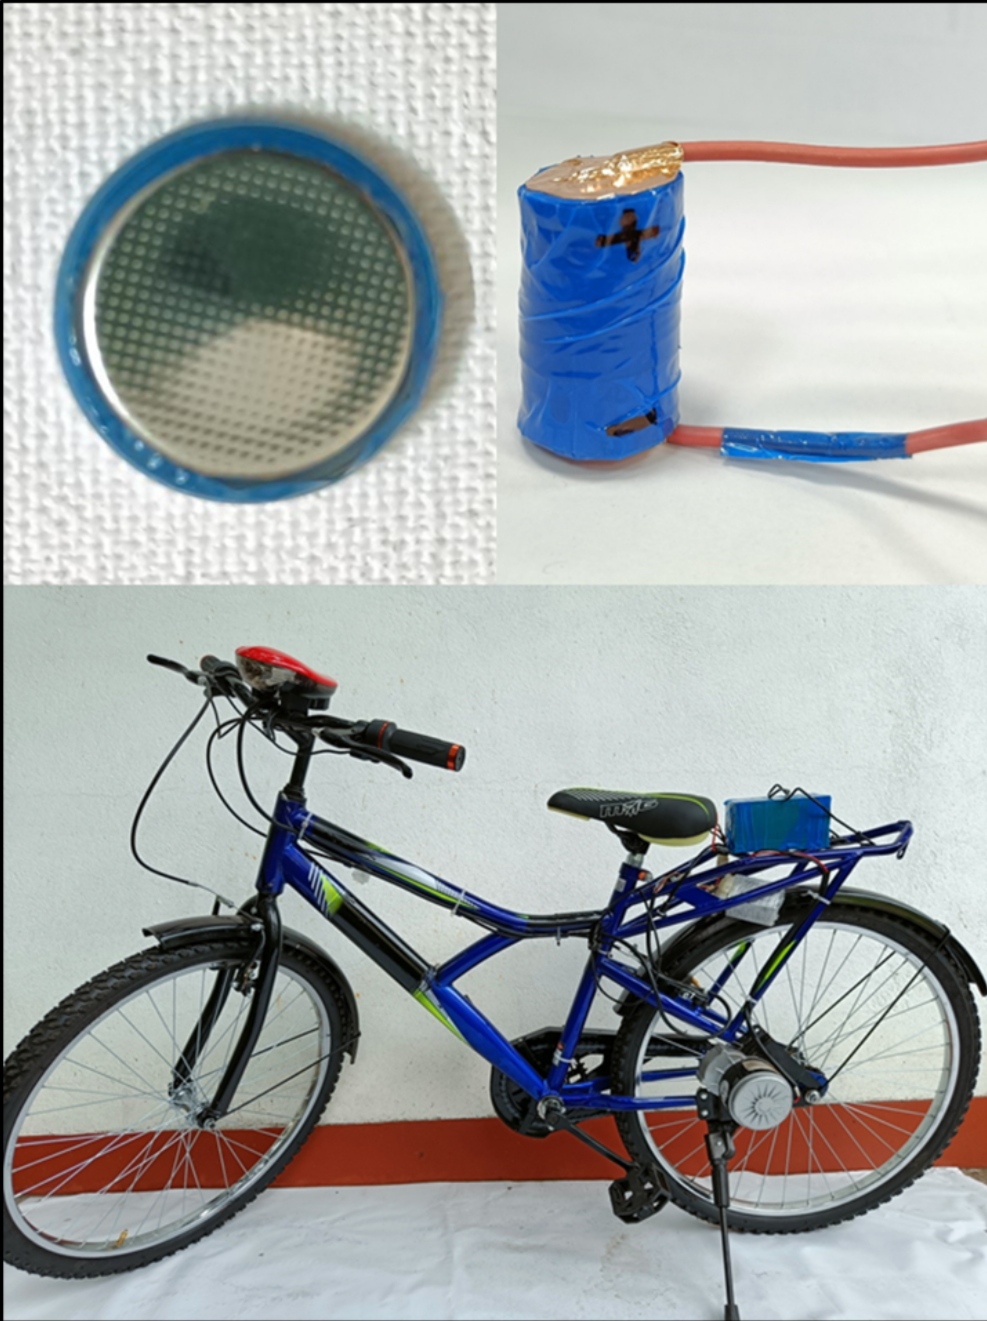 Na-ion based E-cycles developed by IIT Researchers